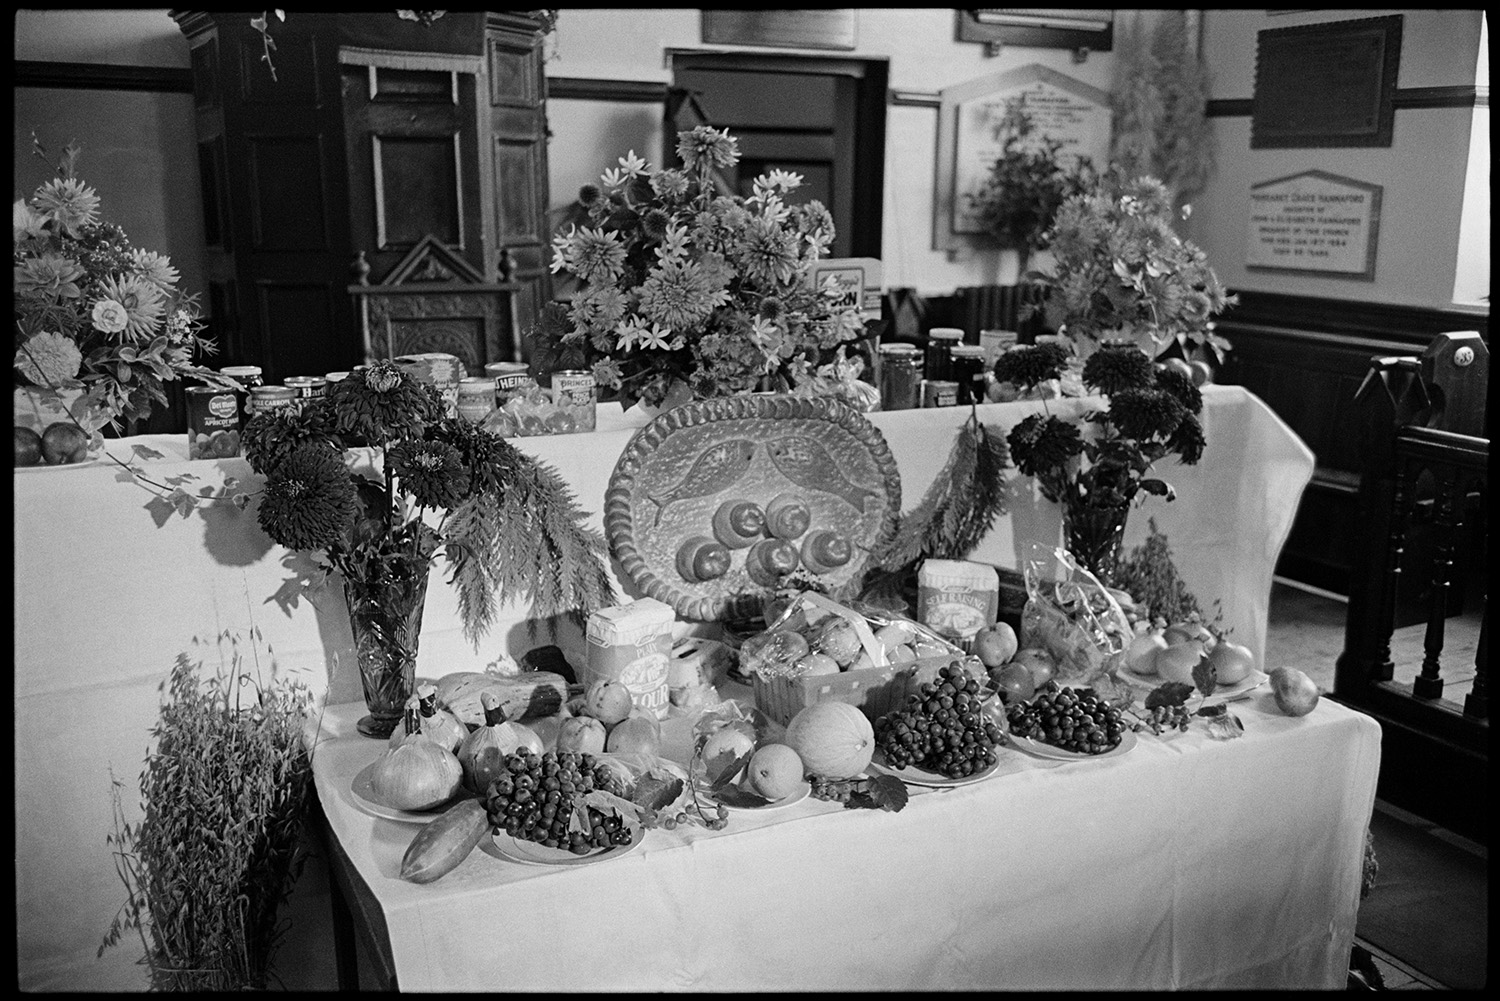 Congregational chapel interior, produce, loaf, on alter table and decorating at Harvest Festival.
[Display of produce at the Harvest Festival in Chulmleigh Congregational chapel. There are vases of flowers, canned food and jars of produce, plates of fruit and vegetables and a salt dough loaf of bread decorated with fives loaves and two fish. A pulpit, chair, memorial wall tablets, and a wooden pew are in the background.]